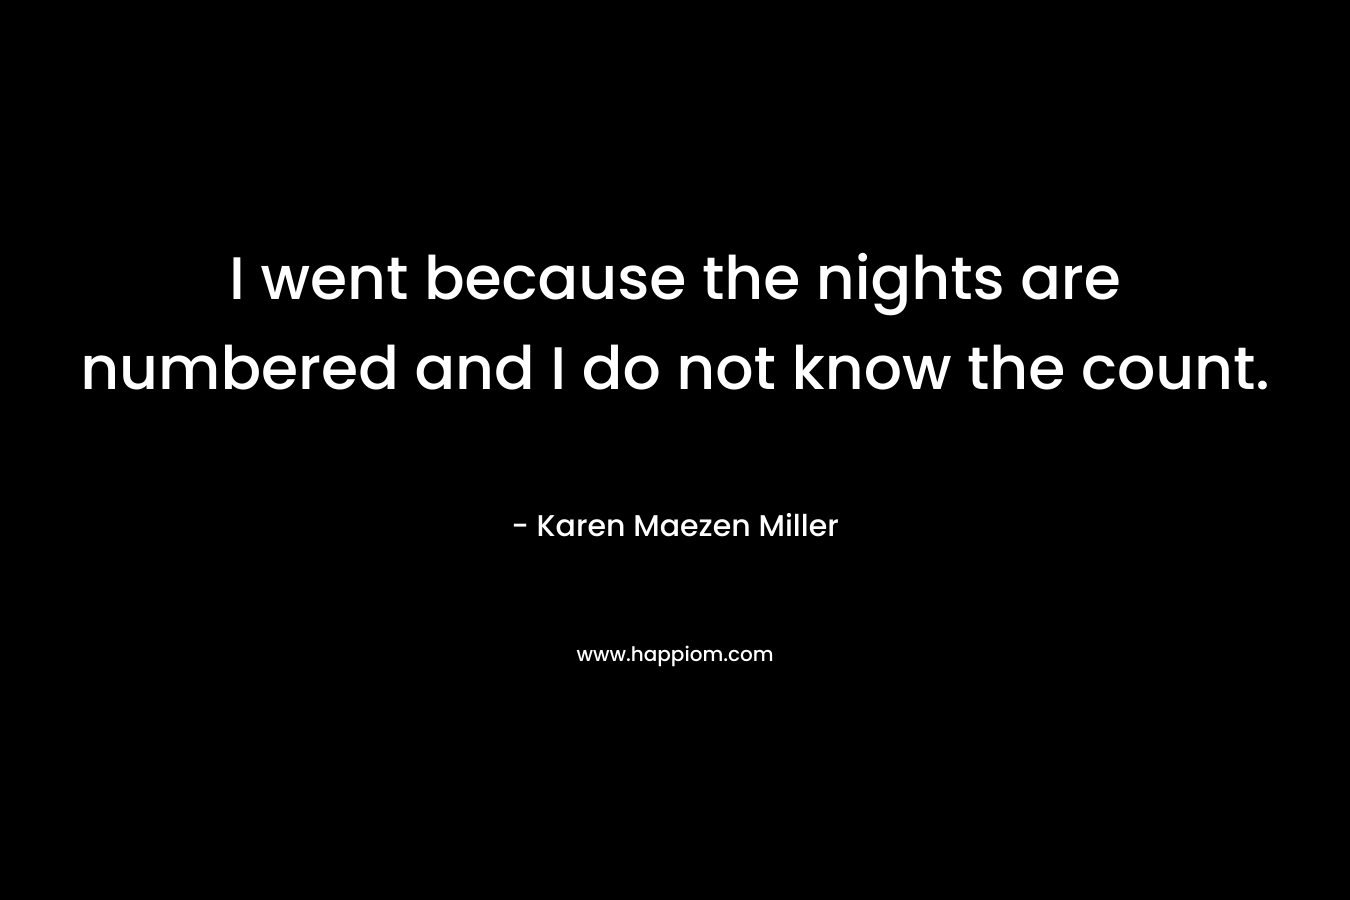 I went because the nights are numbered and I do not know the count. – Karen Maezen Miller